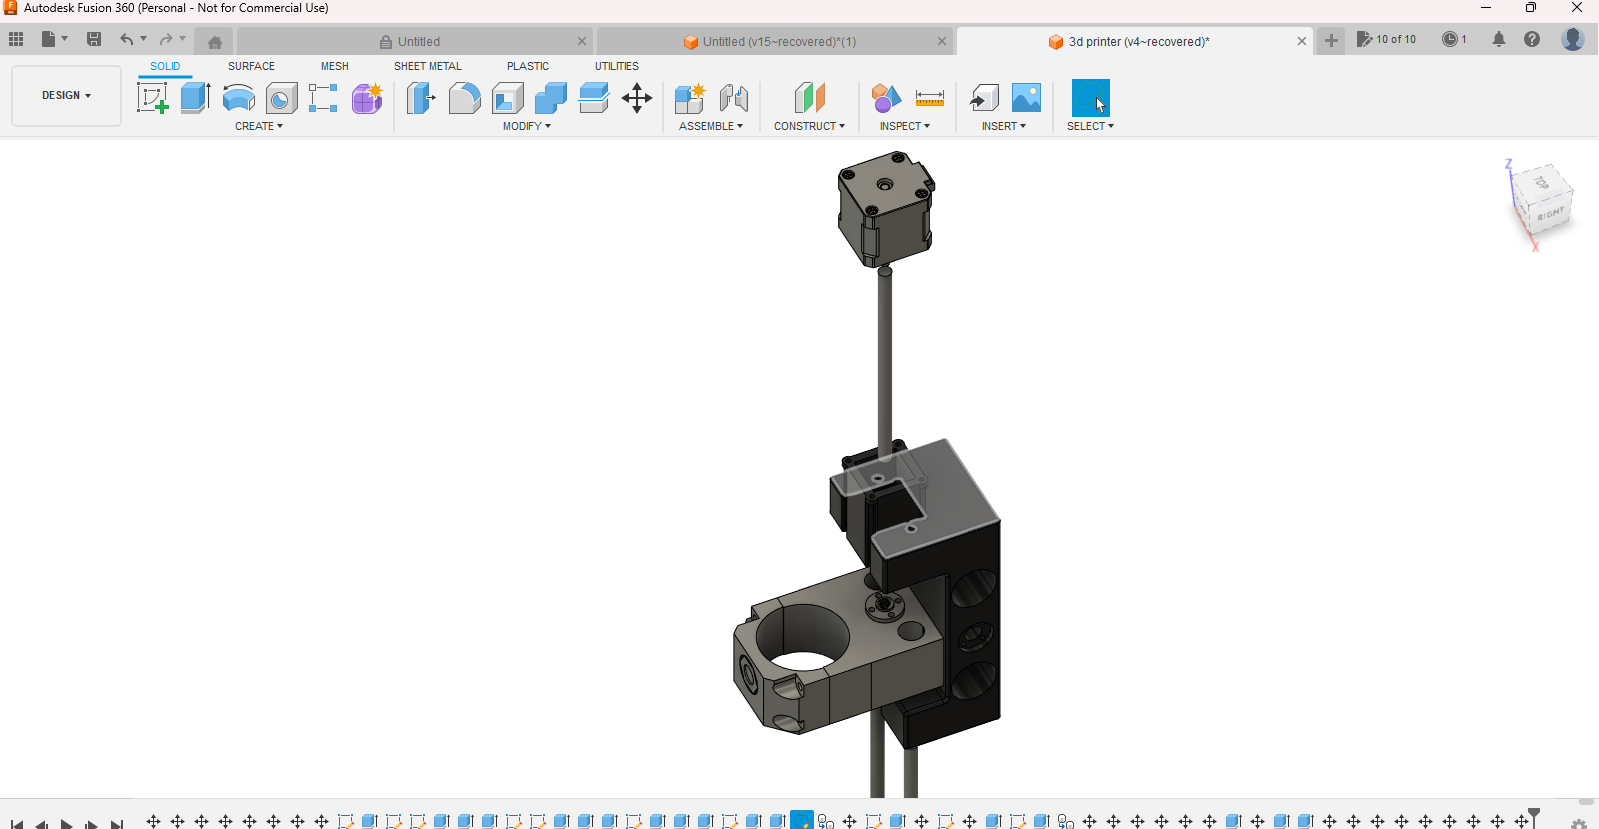 Autodesk Fusion 360 (Personal - Not for Commercial Use) 5_31_2023 7_41_02 PM.png